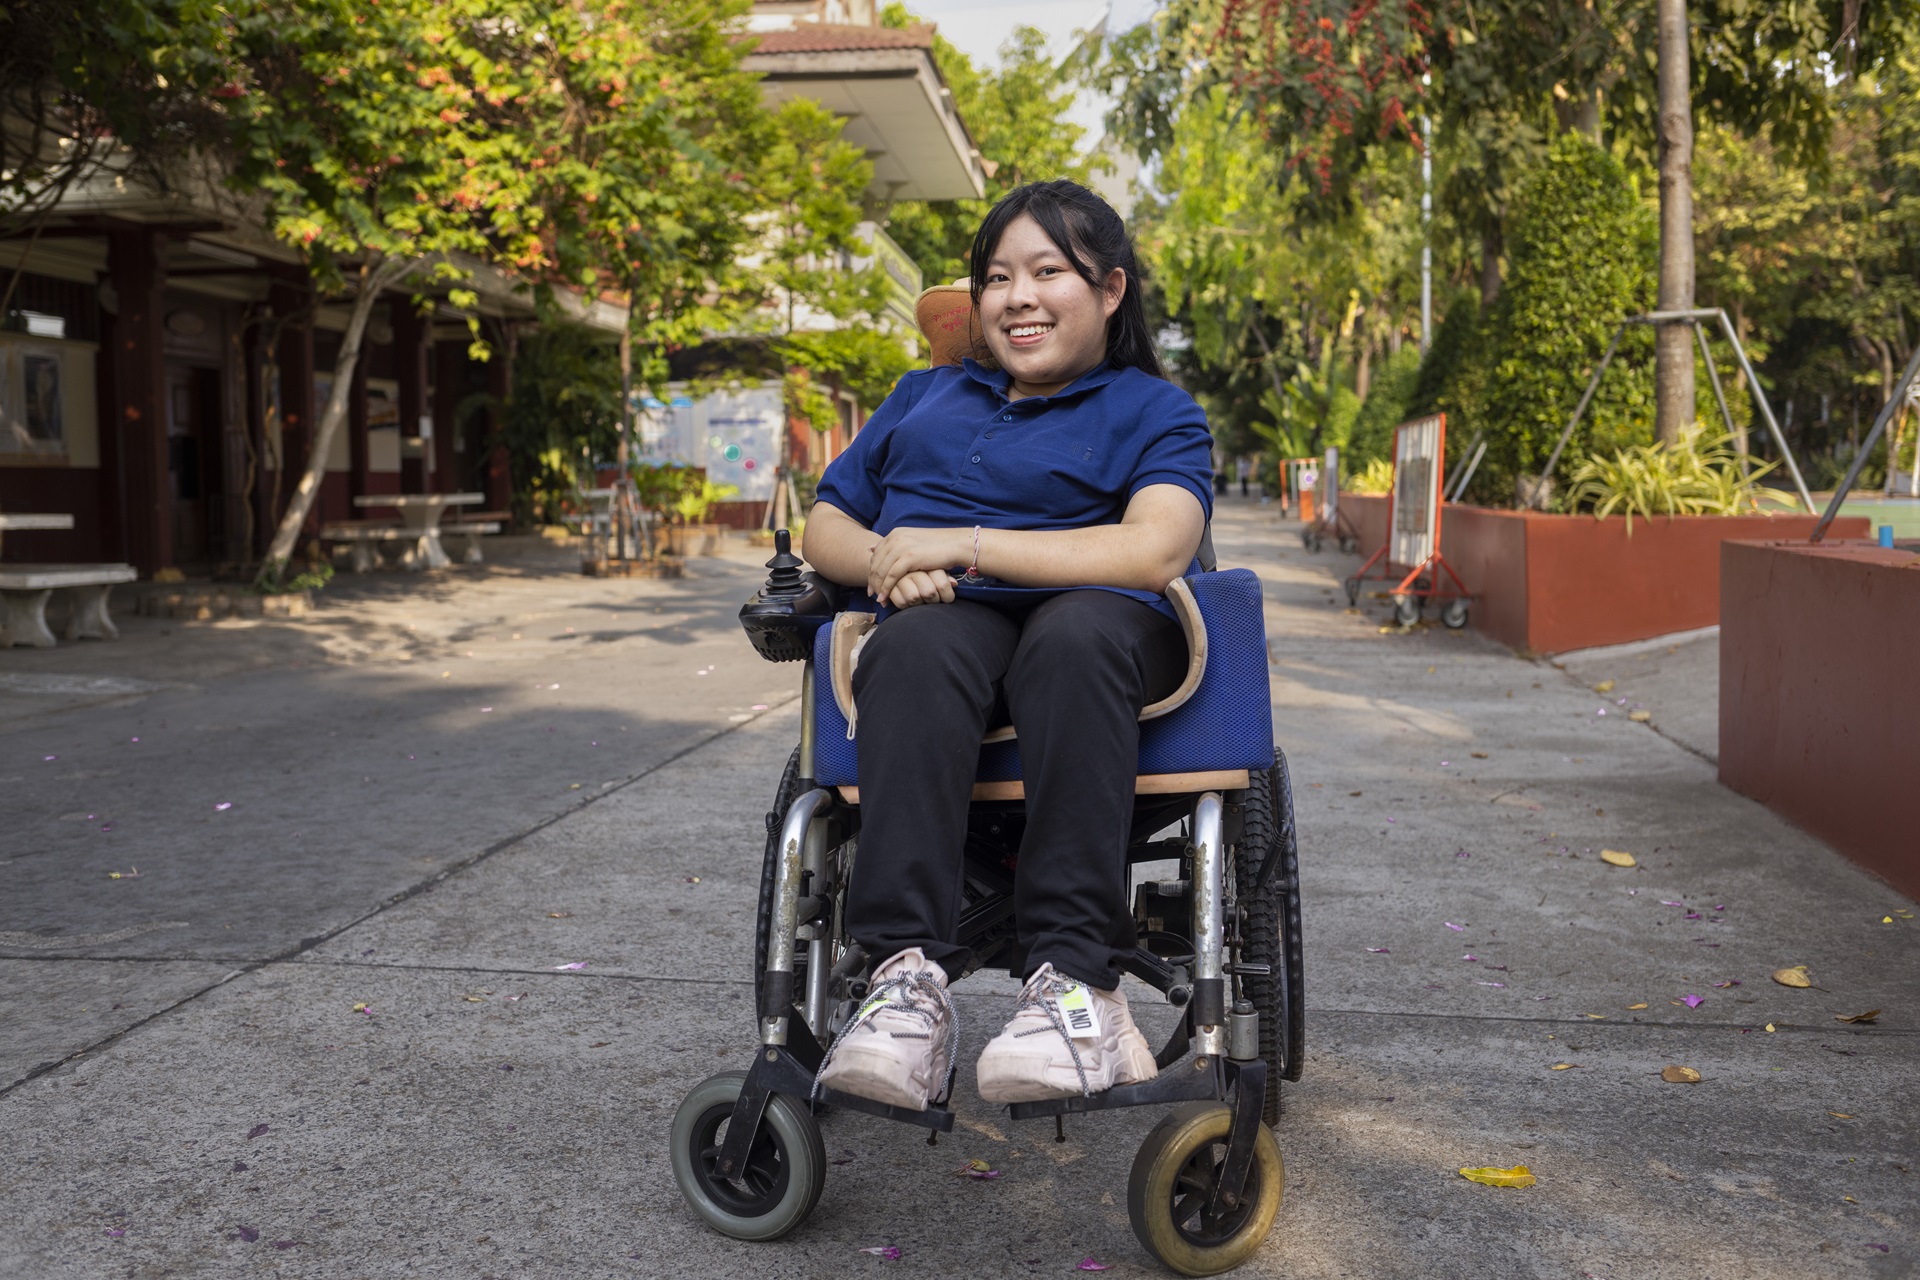 Woman in a wheelchair, smiling